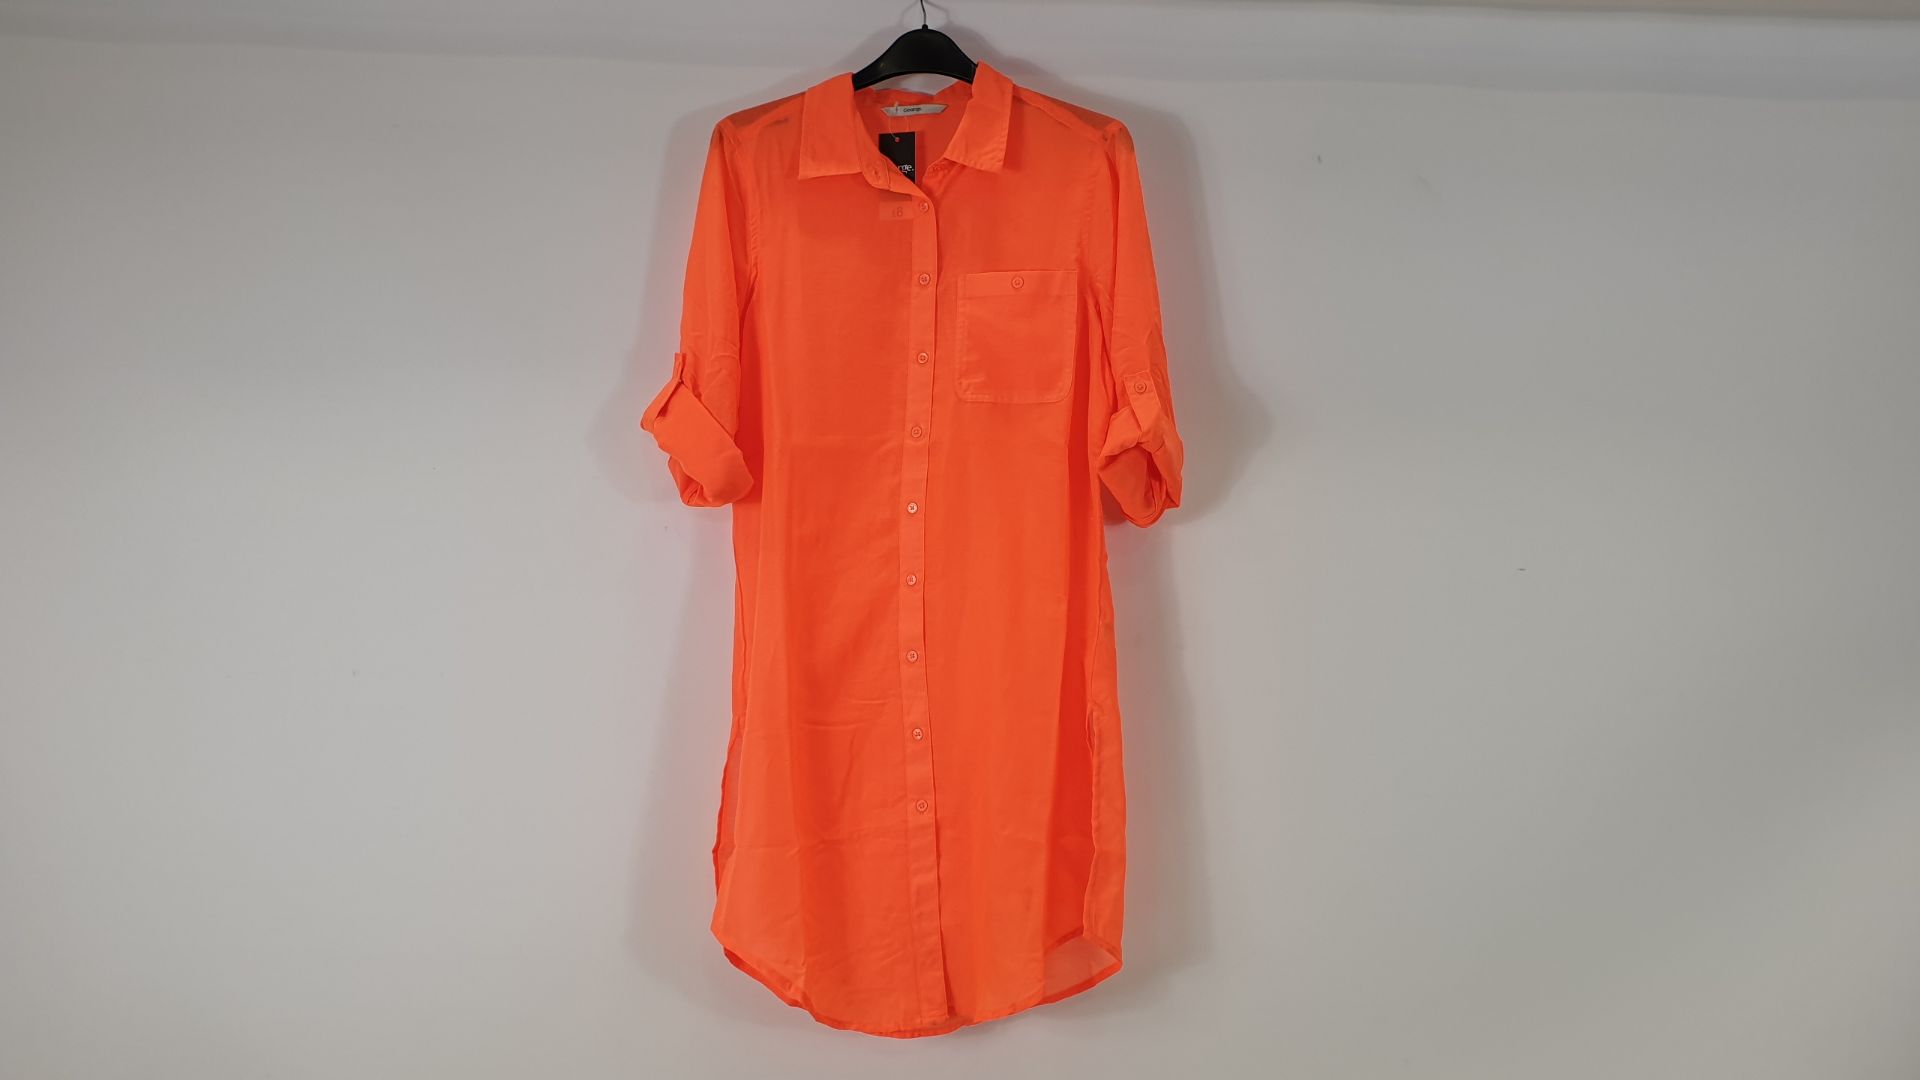 60 X BRAND NEW BRIGHT ORANGE BEACH SHIRTS BY GEORGE - SIZE L - (28890) RRP £8 EACH - IN 3 CARTON